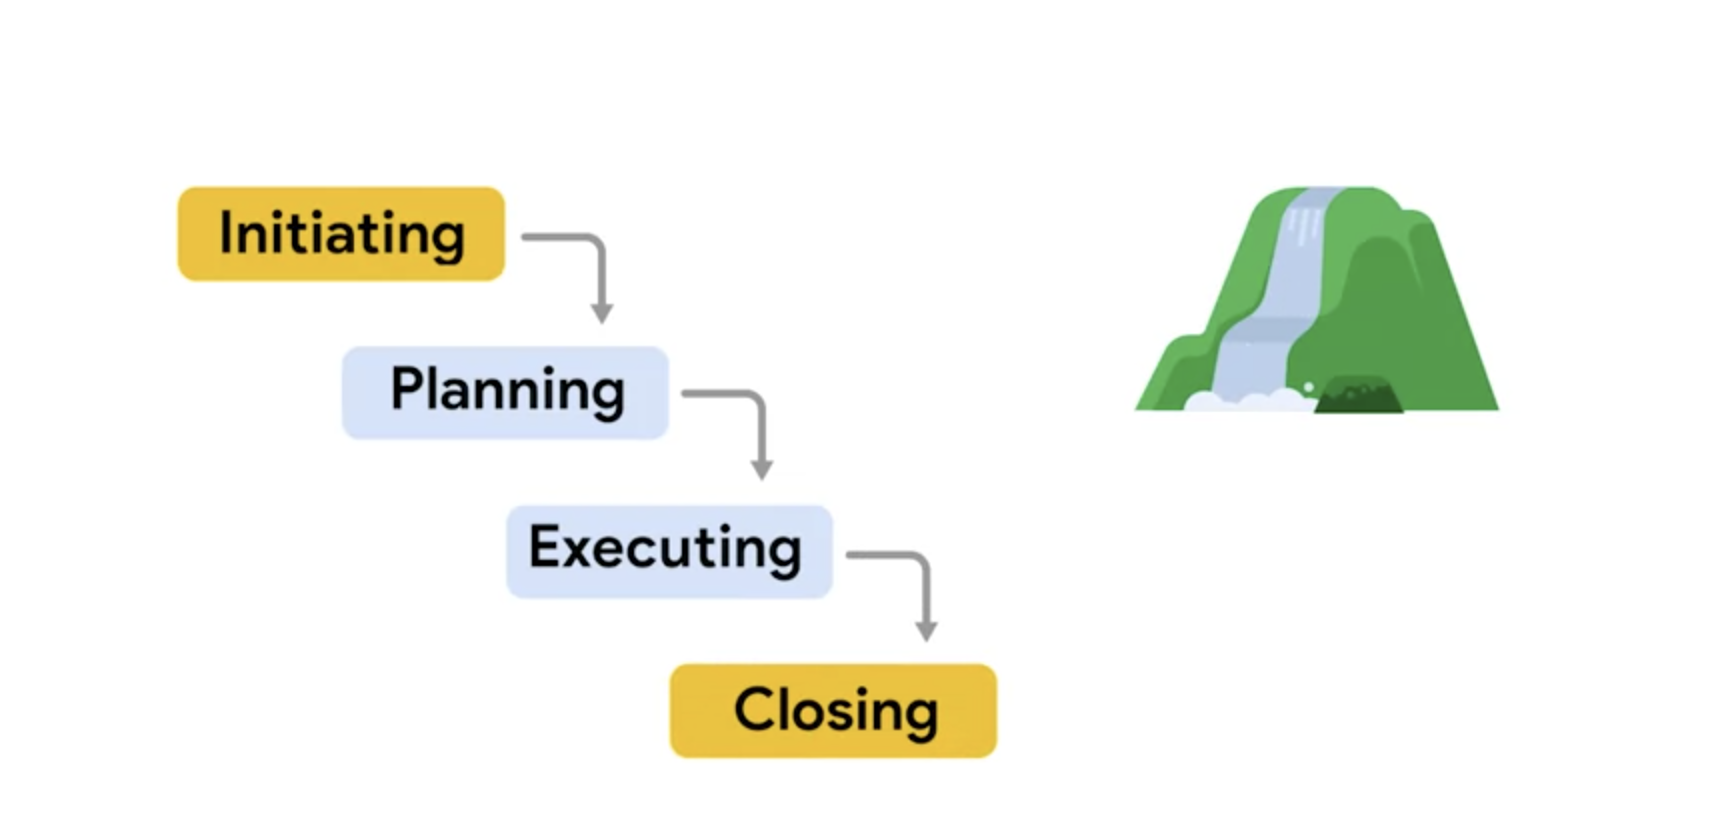 Comparing Waterfall and Agile Approaches